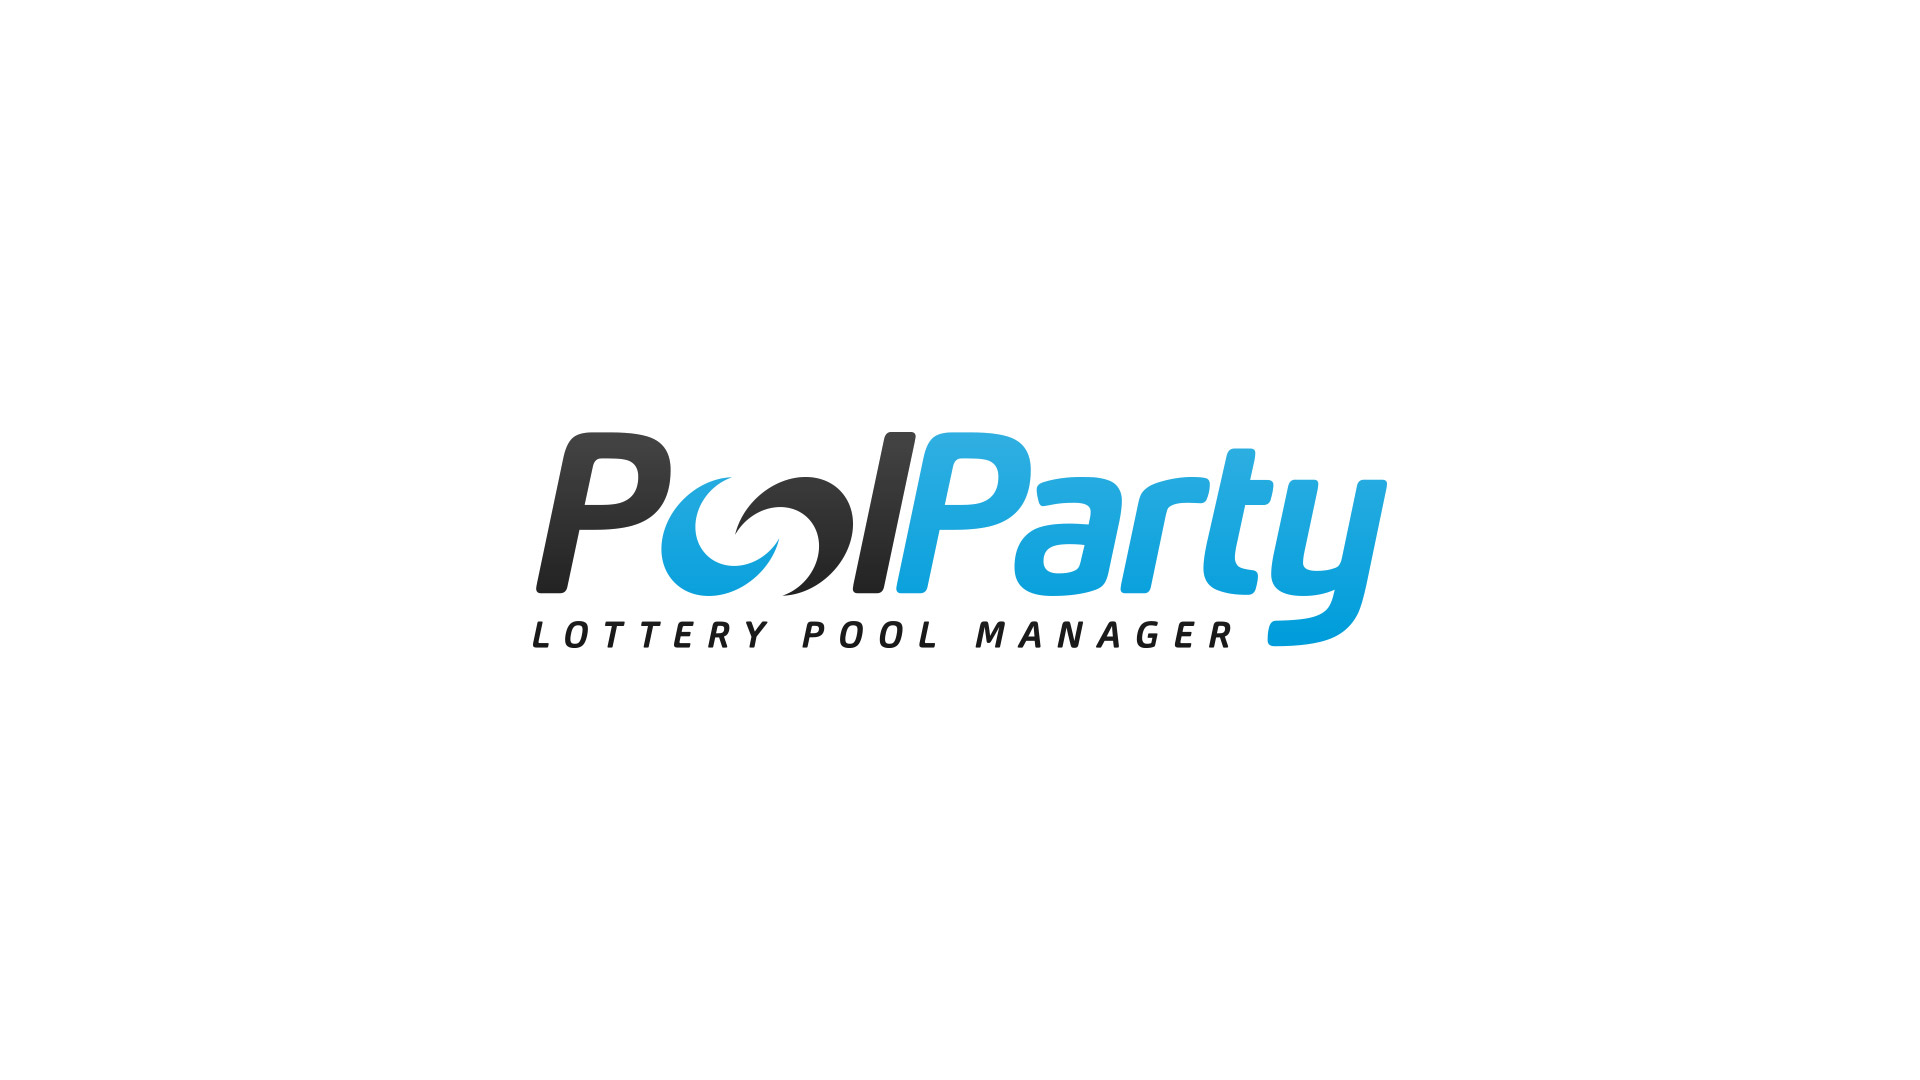 Office Pool Lottery Agreement Poolparty Lottery Pool Manager Atlantic Lottery